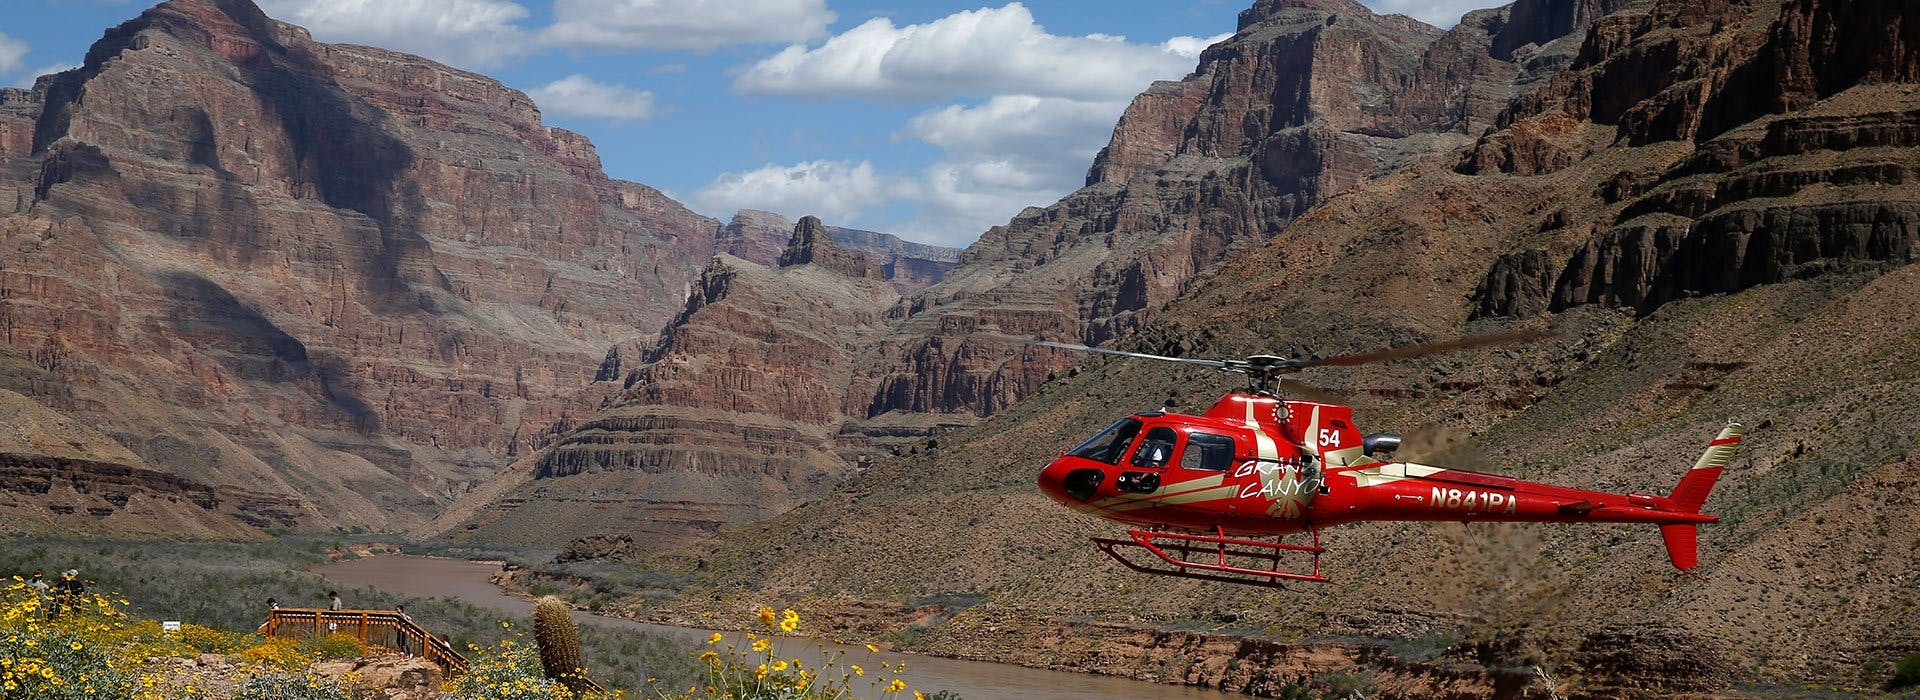 Grand Voyager boat and helicopter tour from Las Vegas Musement